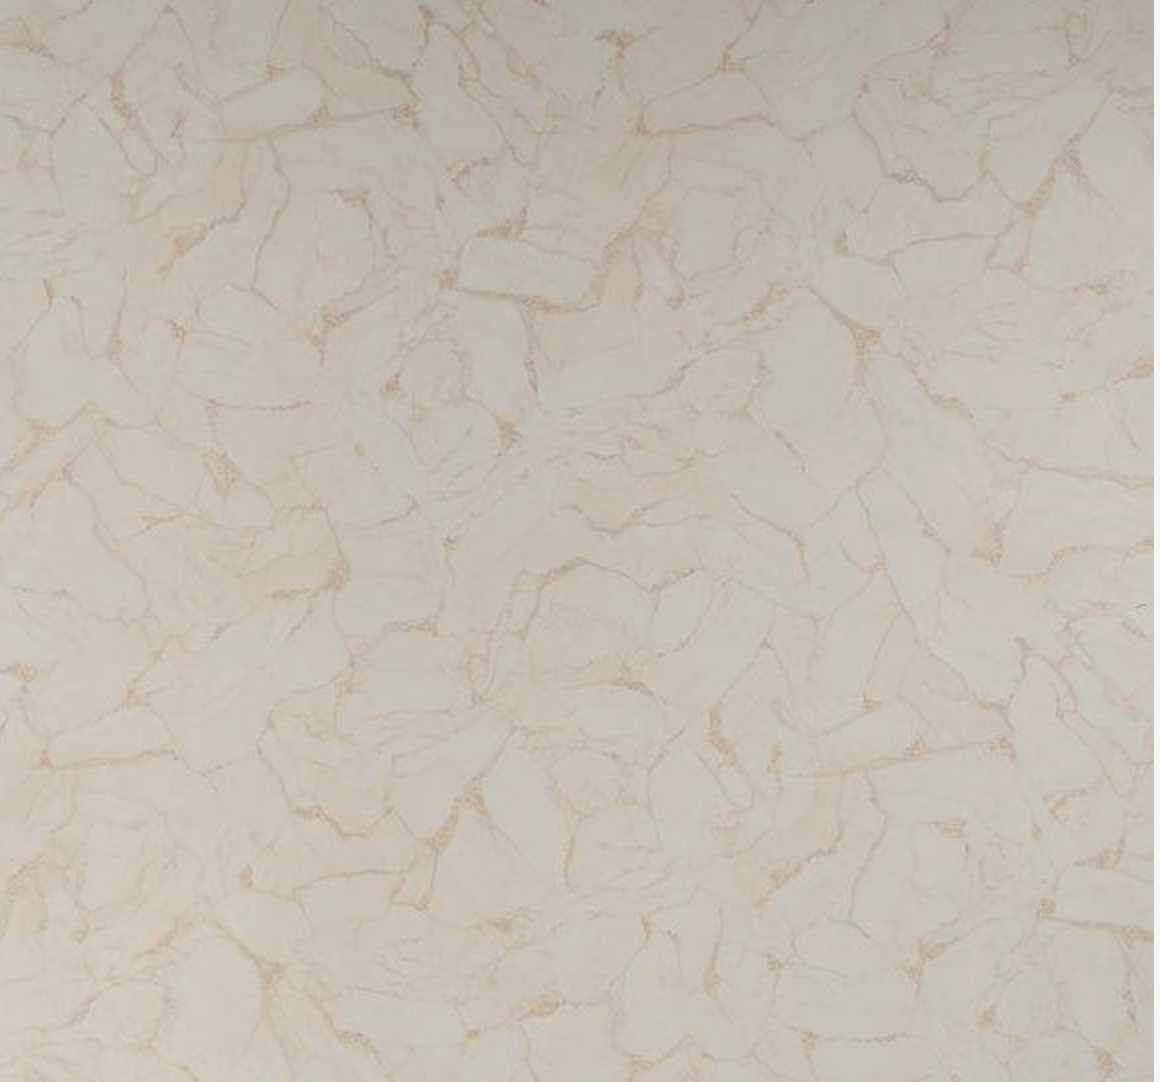 Showerwall Laminate Marble Collection - Peramon Marble